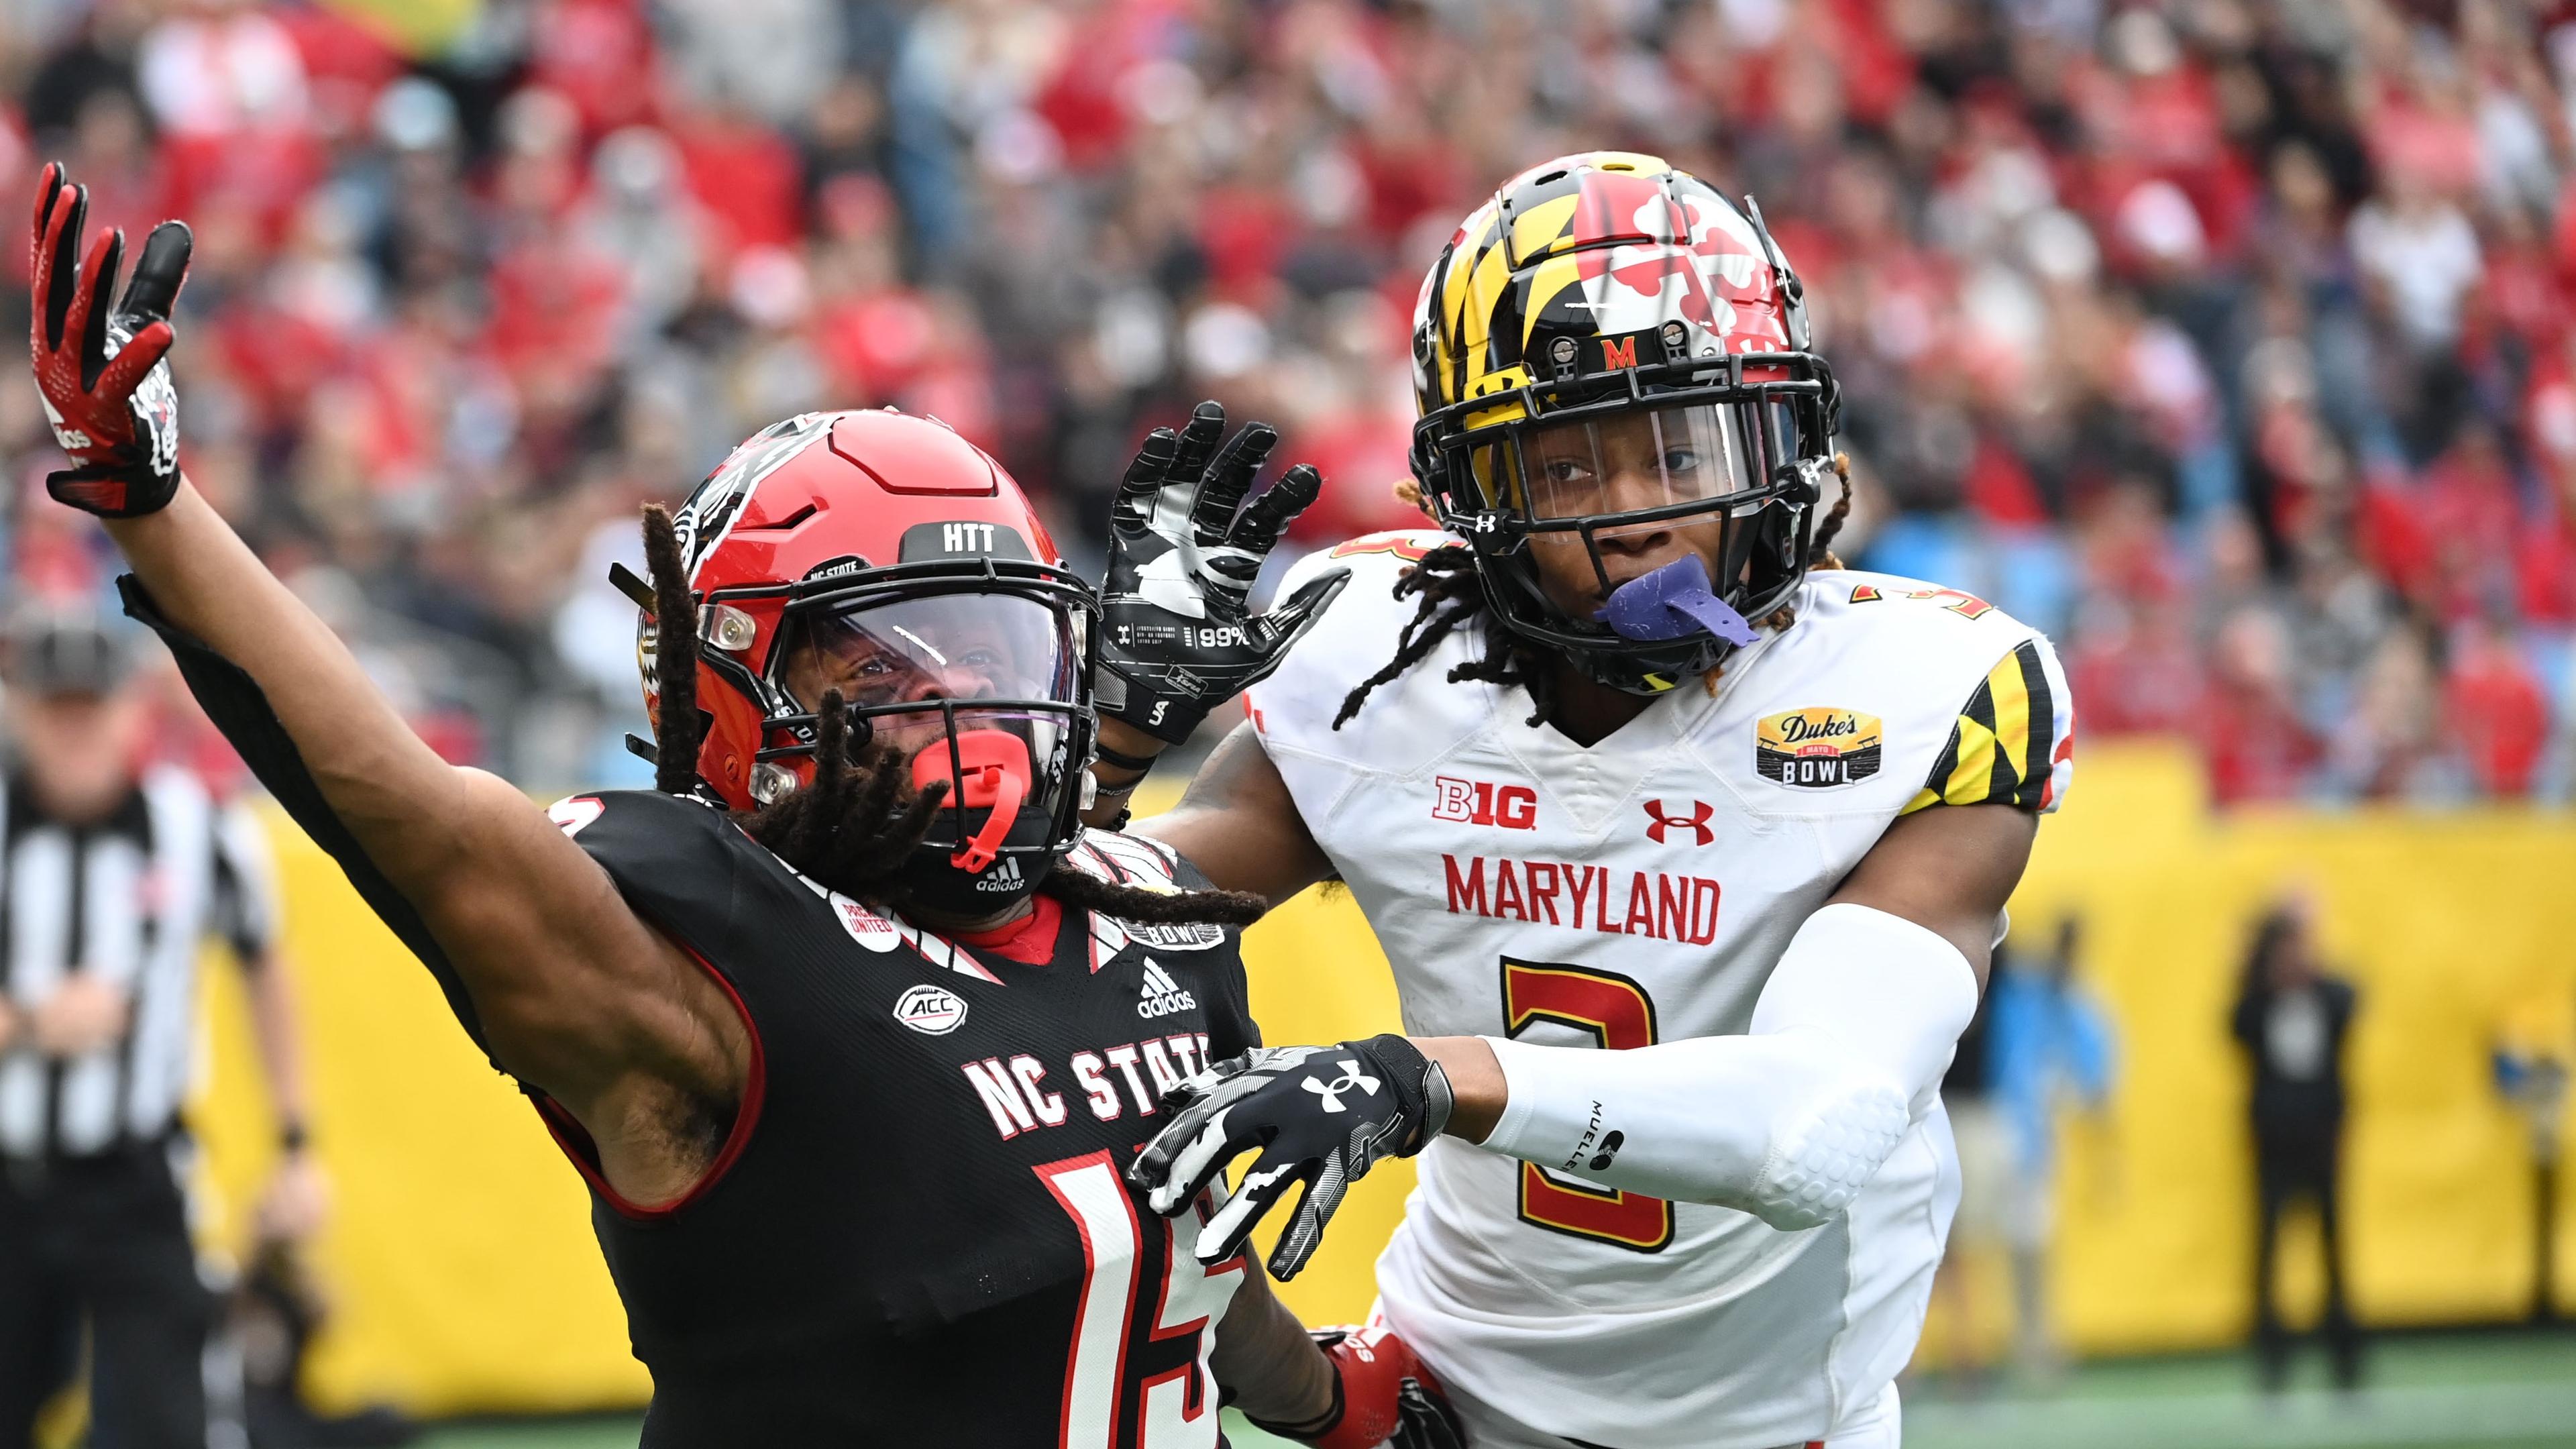 Dec 30, 2022; Charlotte, NC, USA; North Carolina State Wolfpack wide receiver Keyon Lesane (15) reaches for a pass as Maryland Terrapins defensive back Deonte Banks (3) defends in the fourth quarter in the 2022 Duke's Mayo Bowl at Bank of America Stadium. / Bob Donnan-USA TODAY Sports